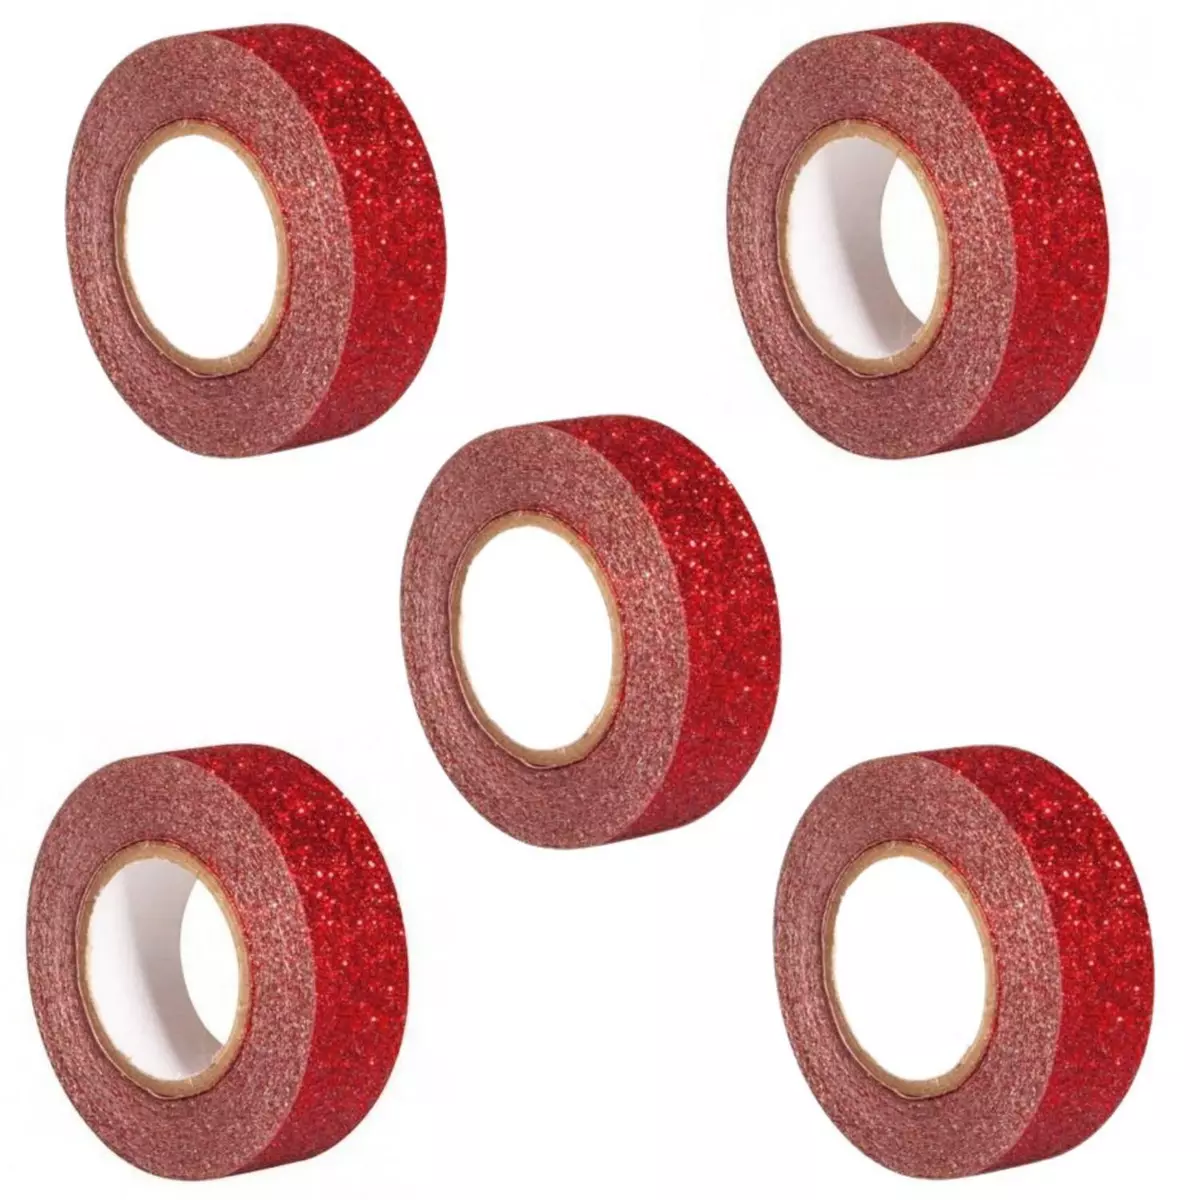 Rayher 5 glitter tapes 5 m x 1,5 cm - rouge